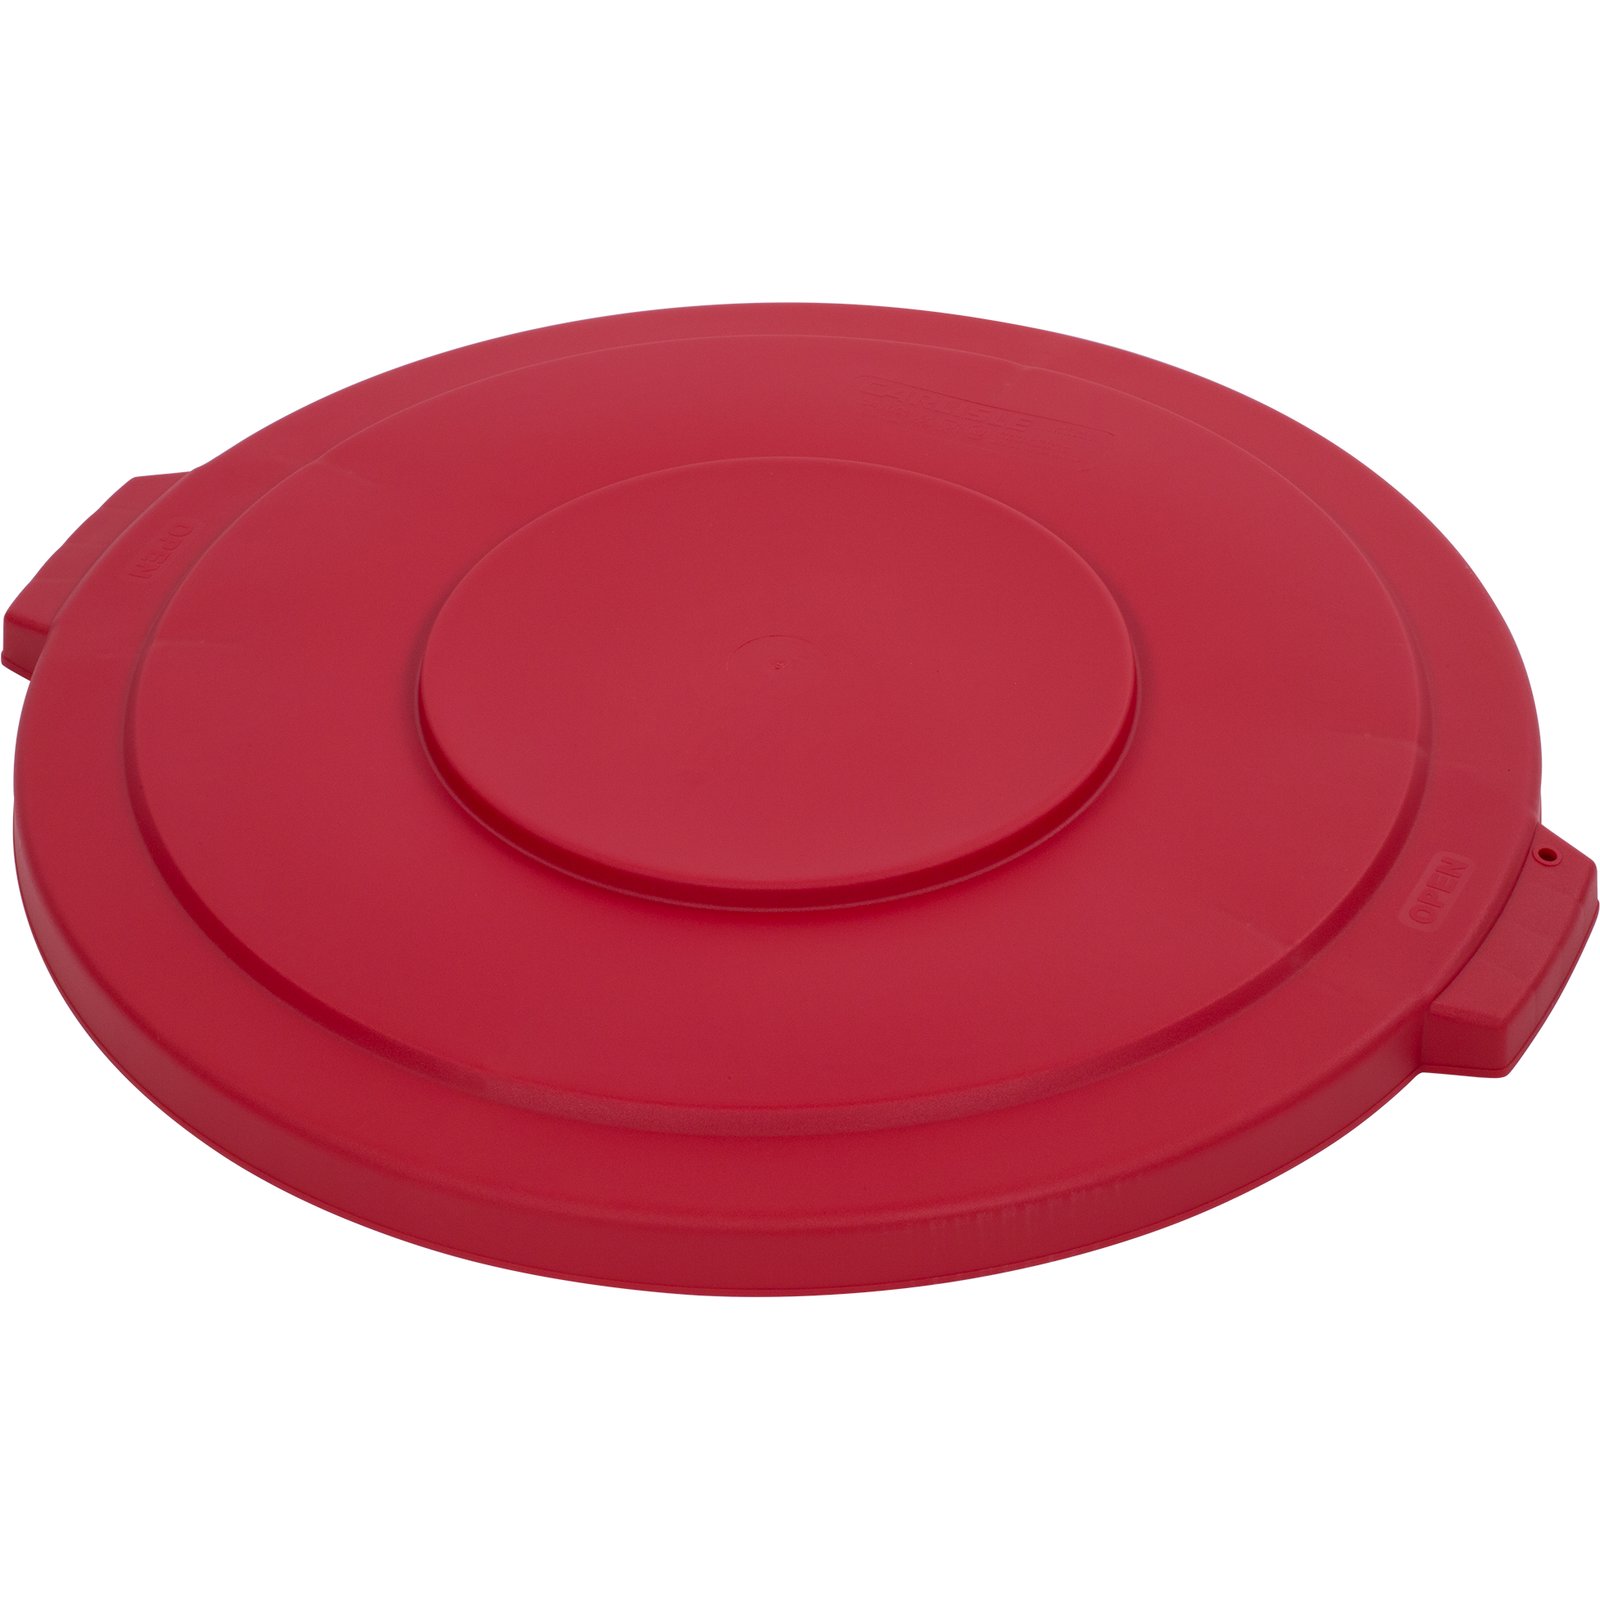 LID FOR A 32 GAL BRONCO WASTE  RECEPTACLE - RED (4/CS)